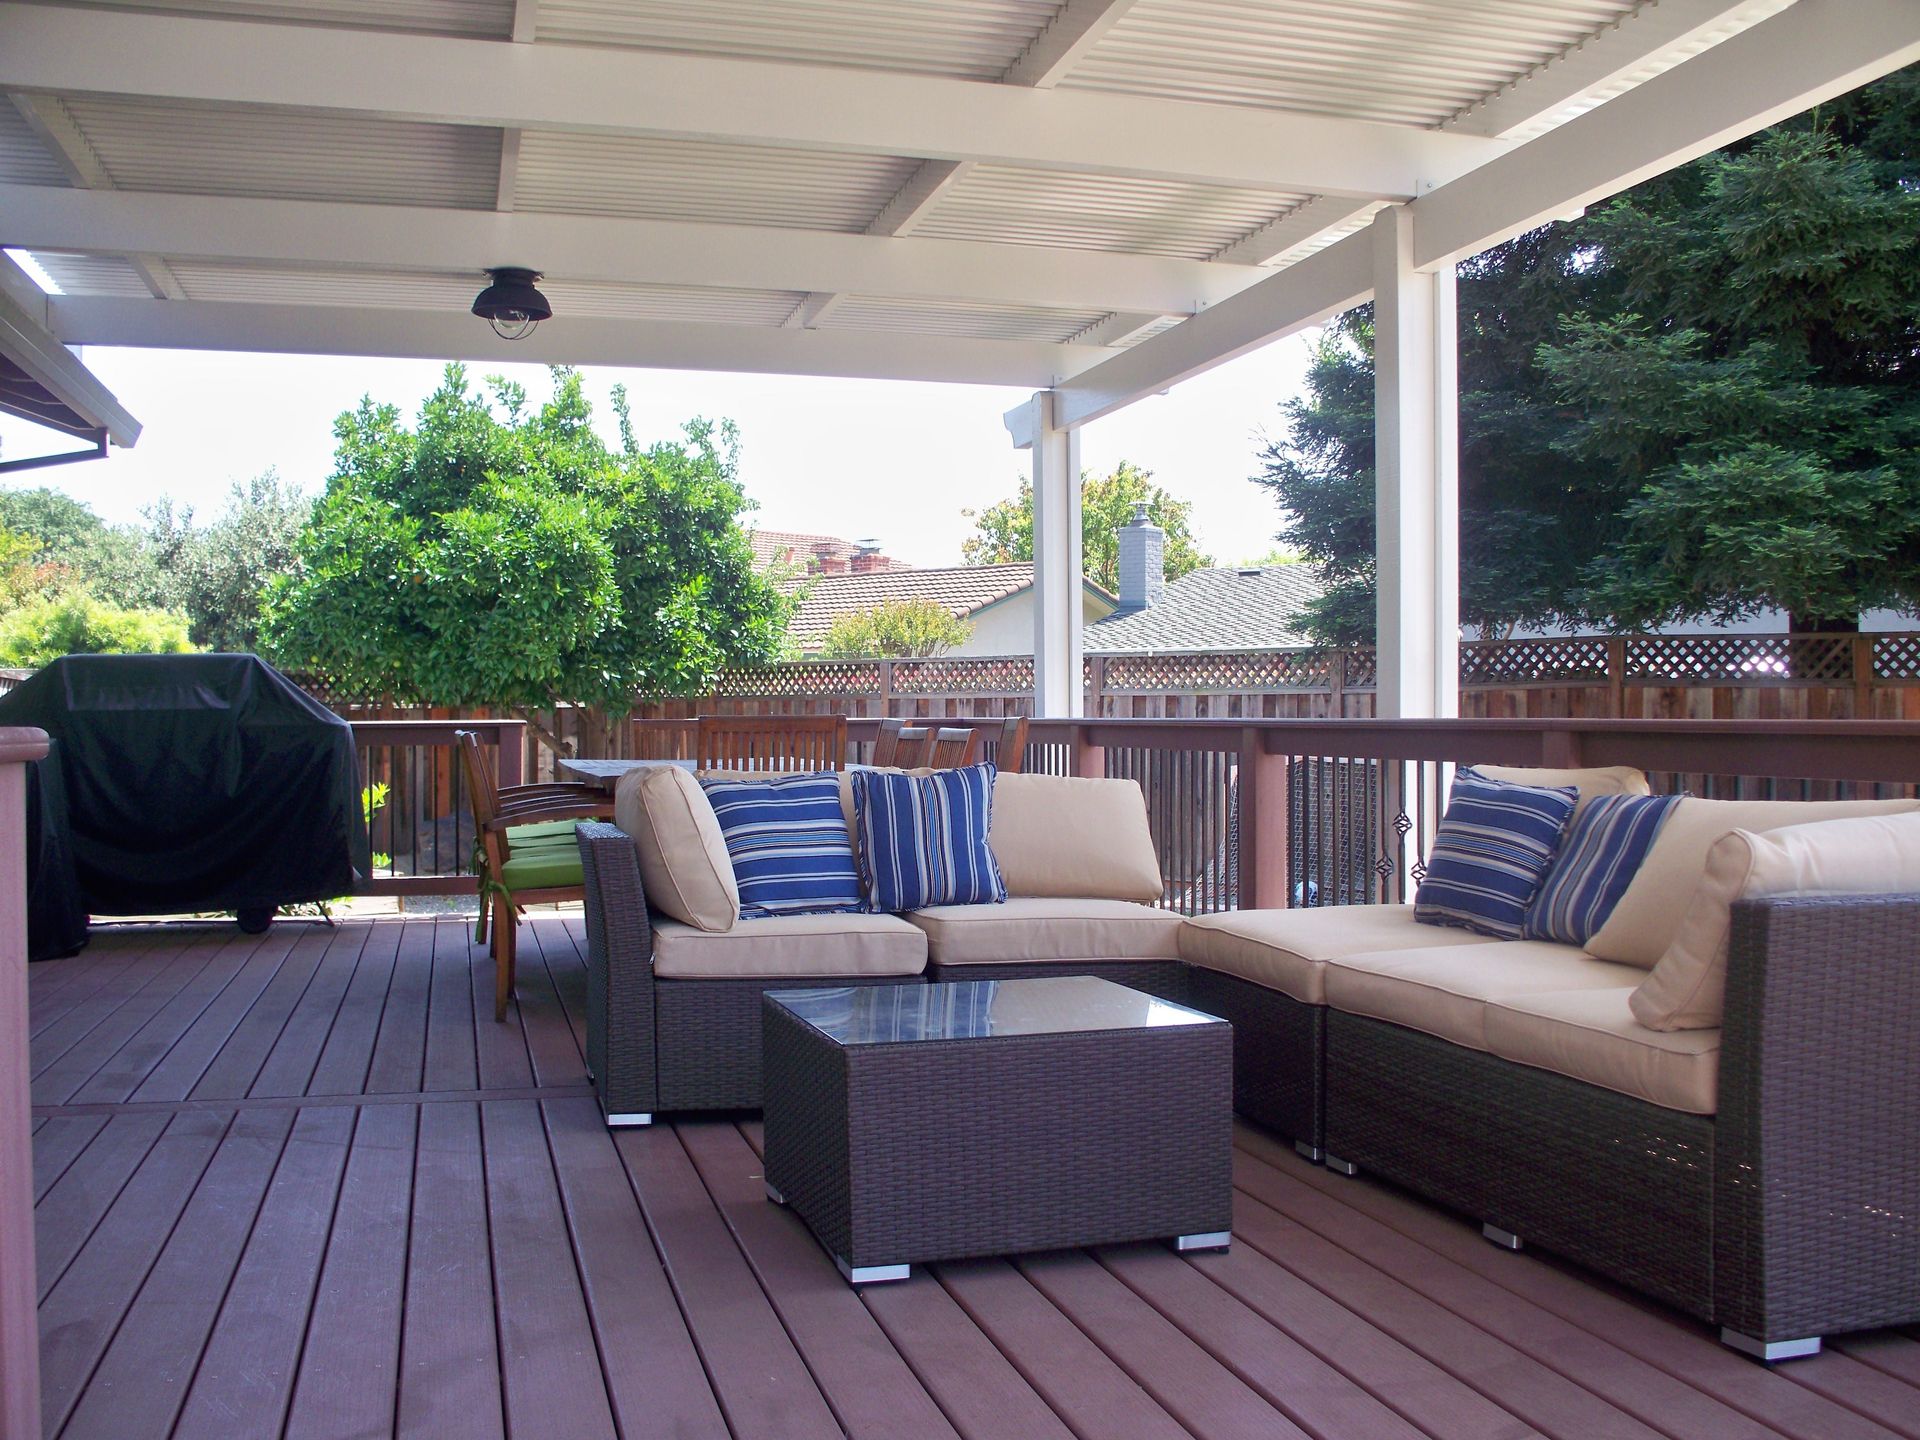 Solid Patio Cover Protecting Furniture on Deck in Concord, CA